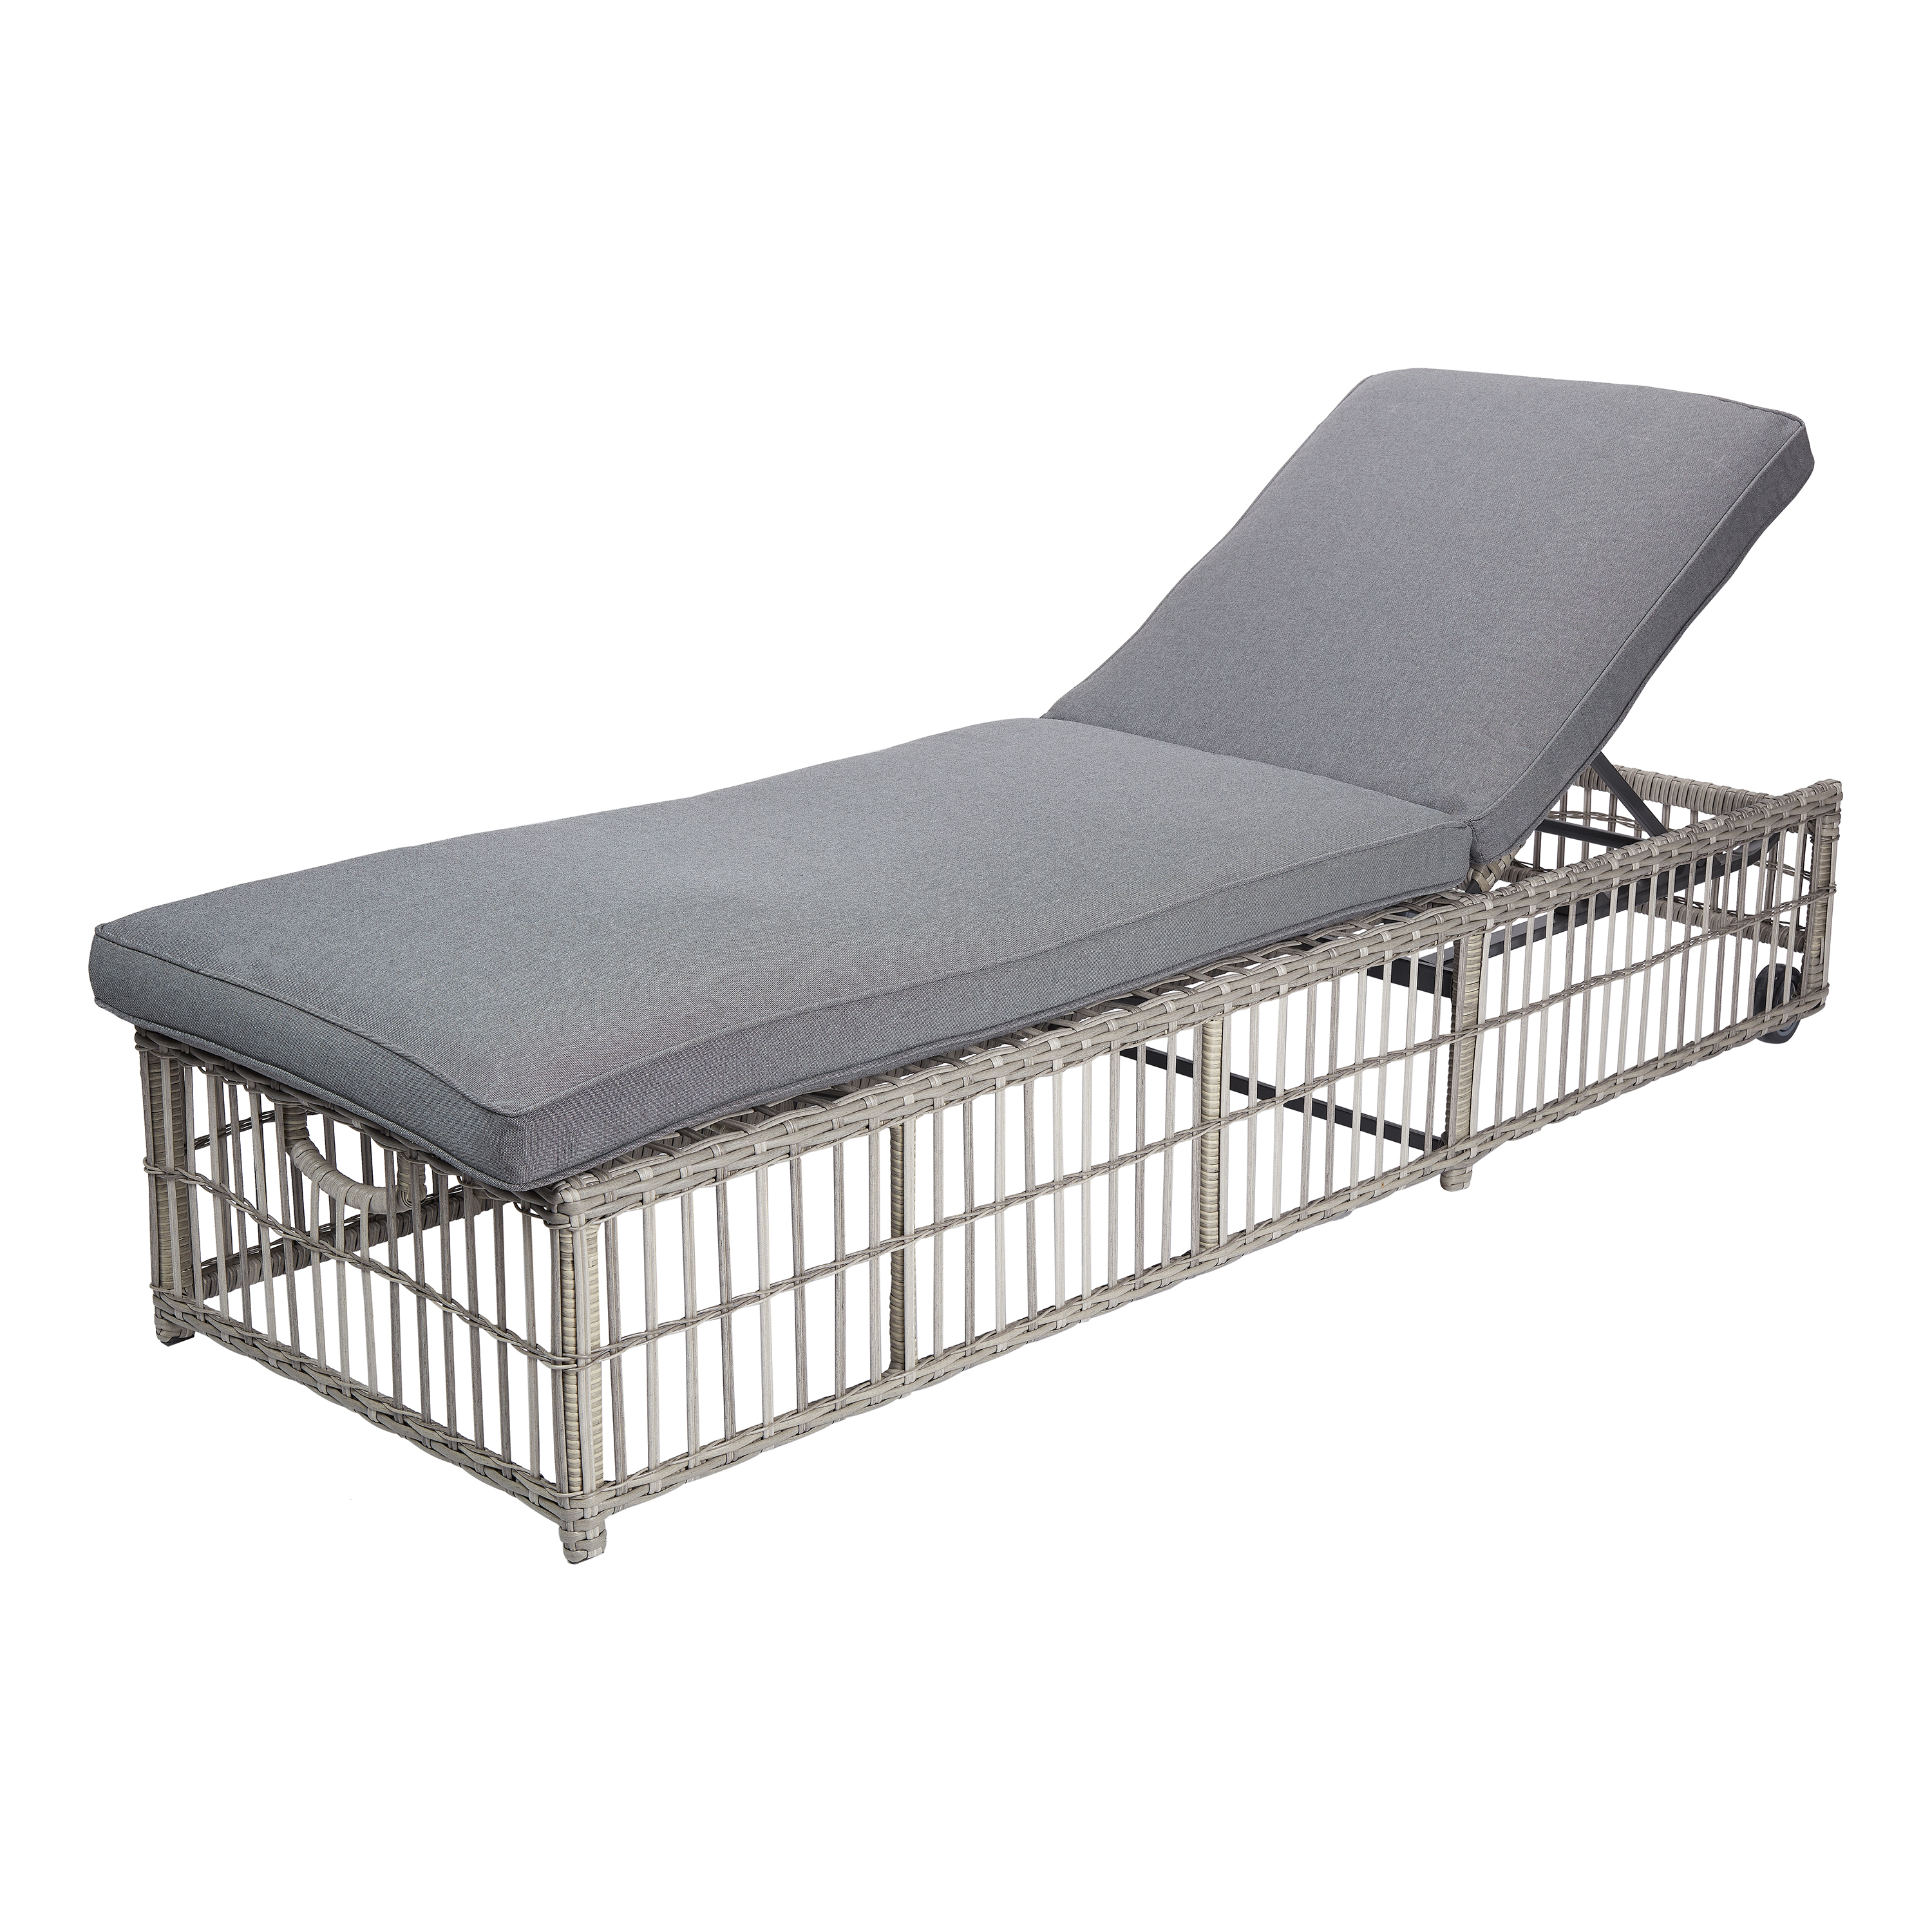 Better Homes & Gardens Belfair Outdoor Wicker Chaise Lounge with Gray Cushions - image 1 of 5